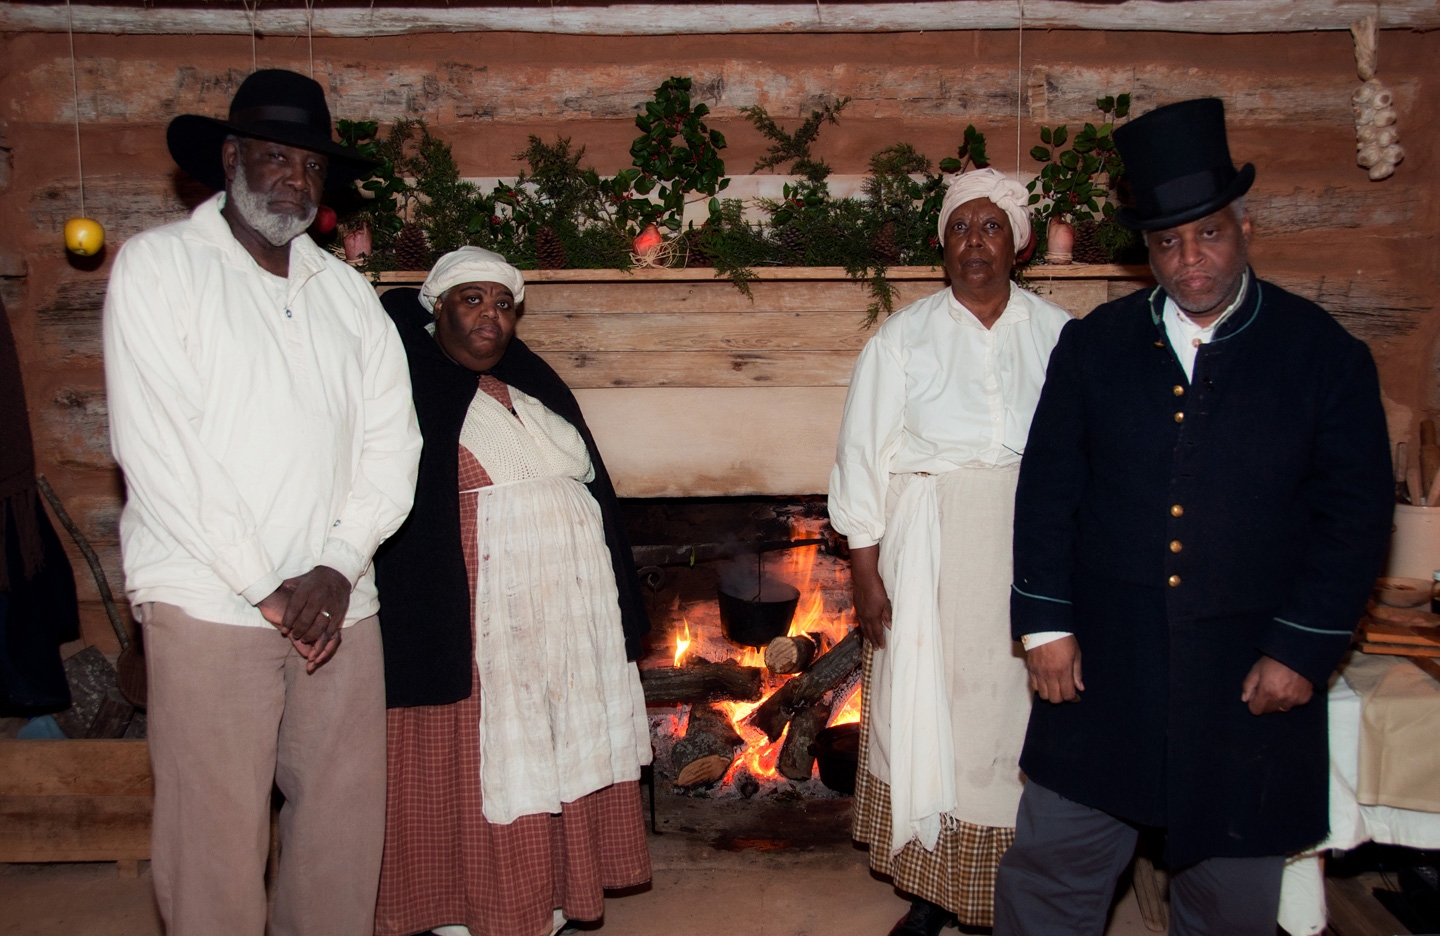 Four people dressed as enslaved people in front of the fireplace in cabin